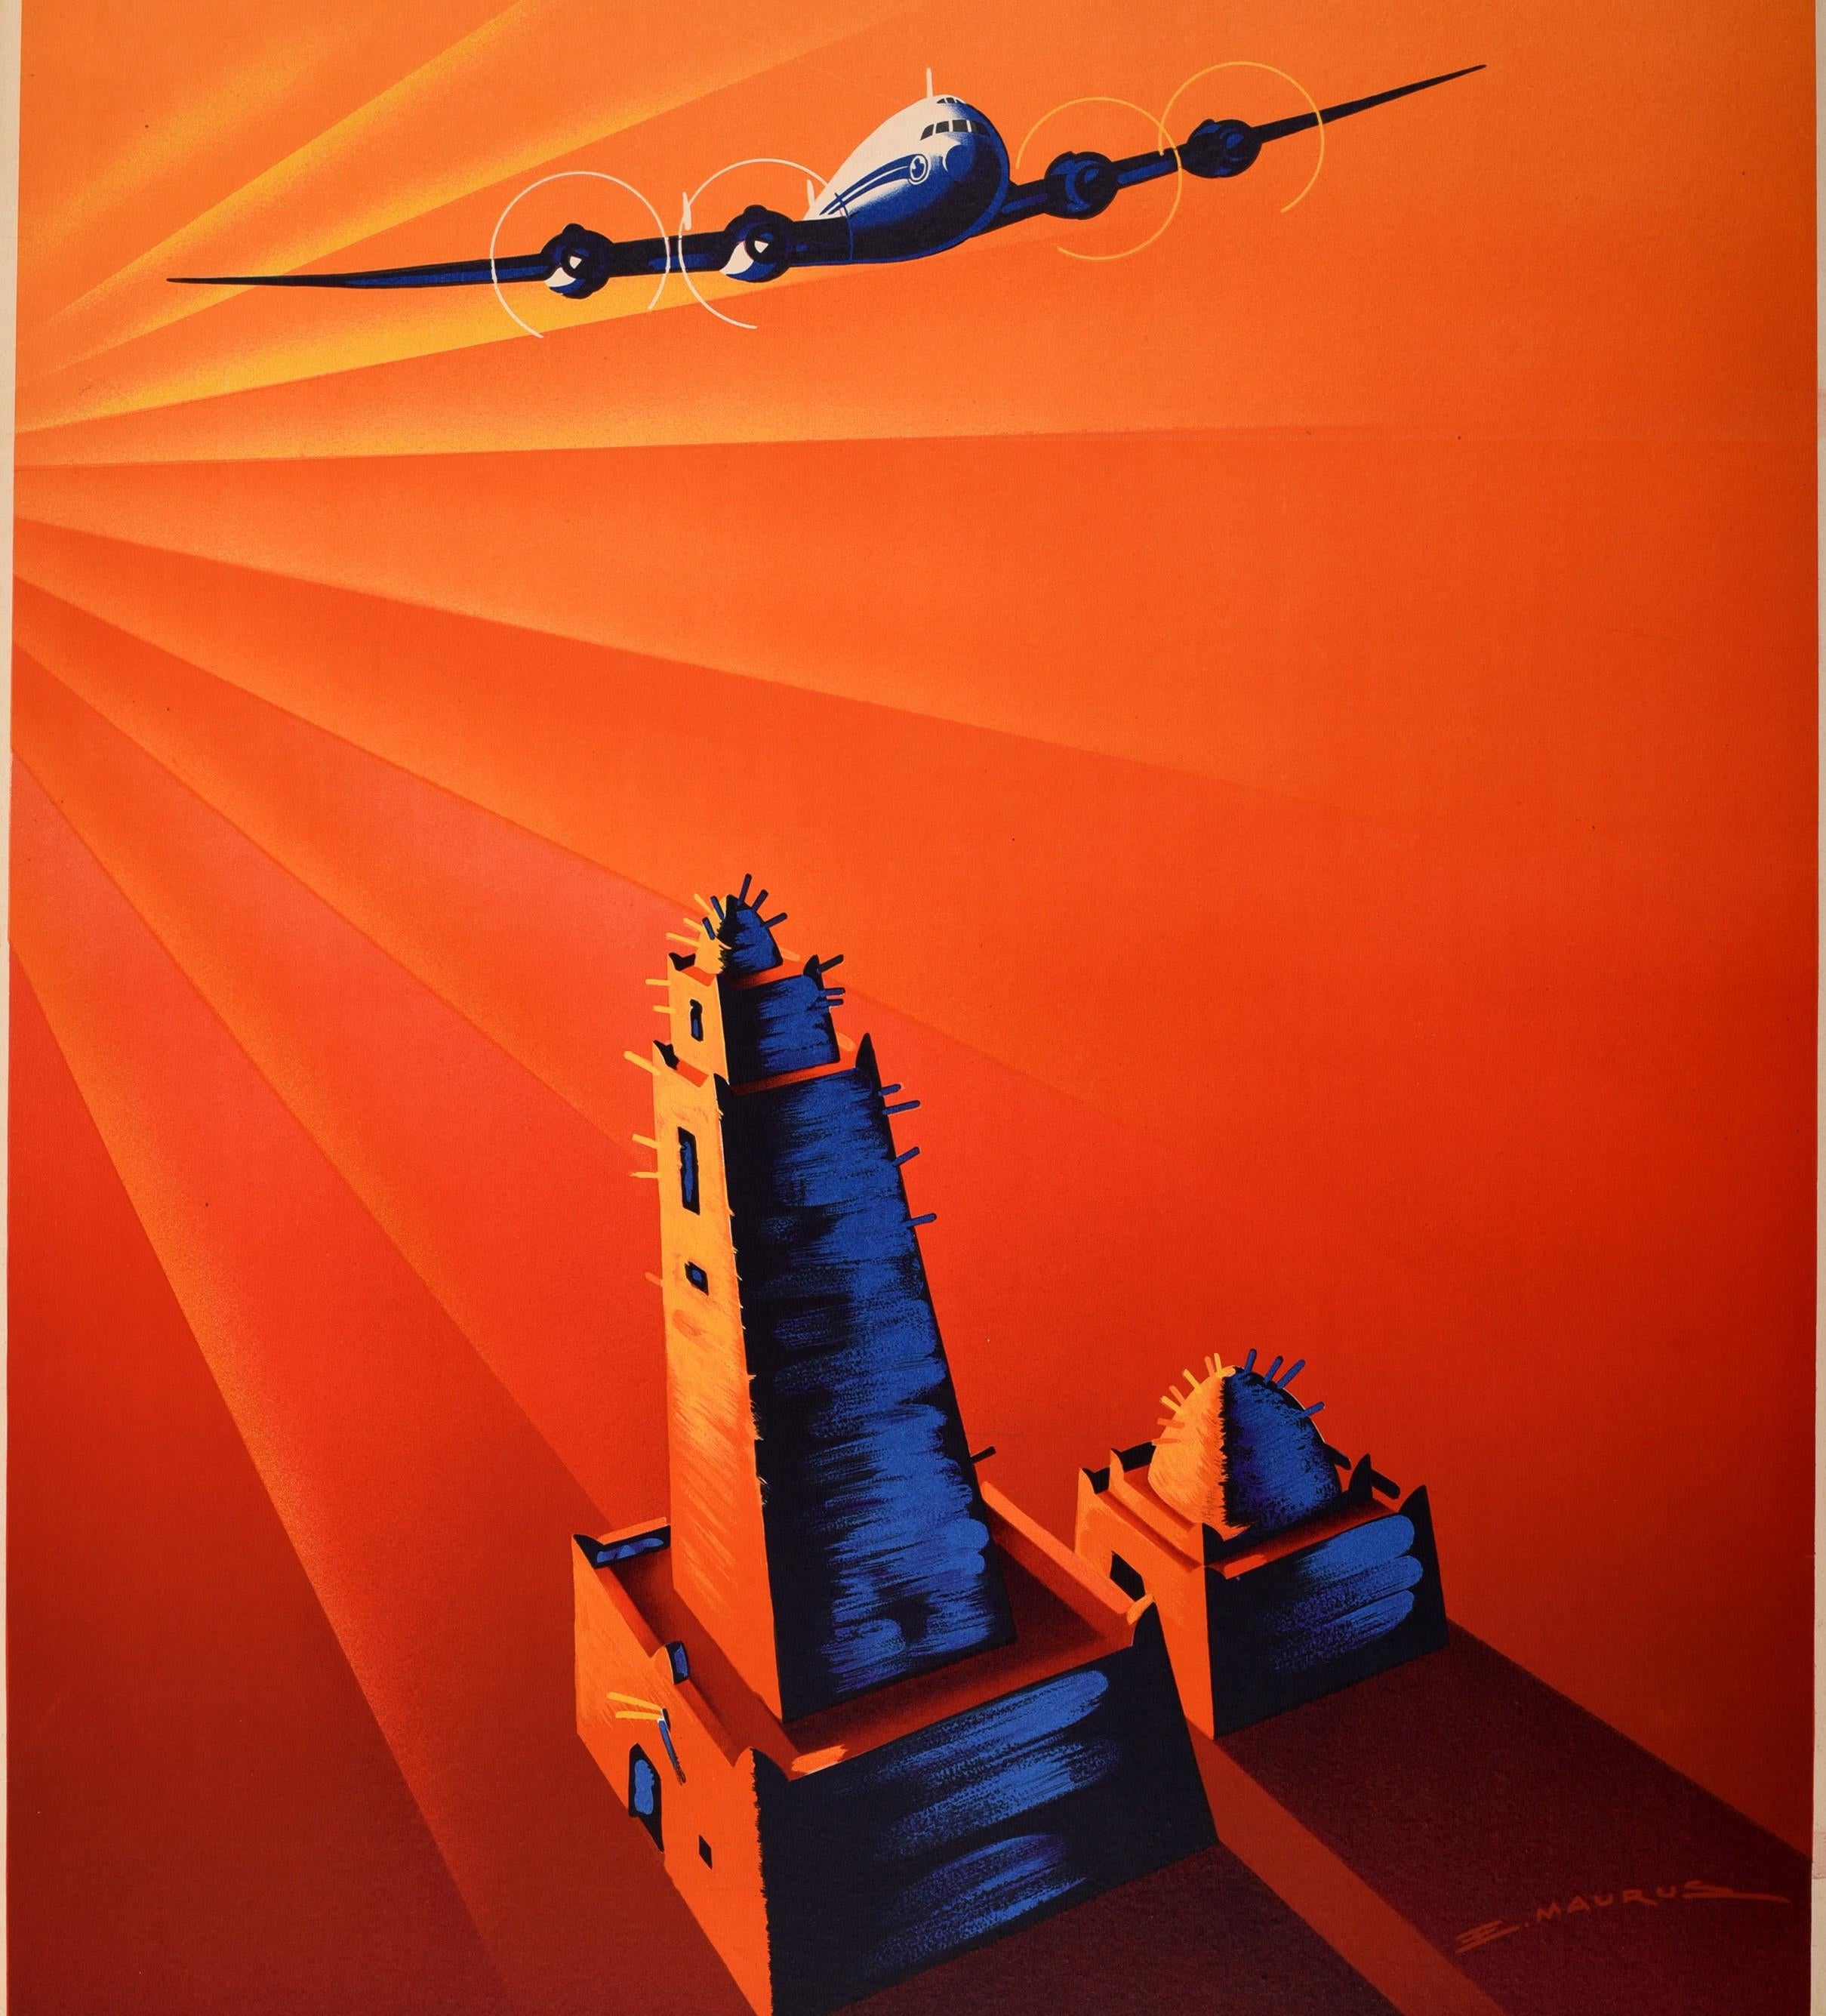 french art deco posters